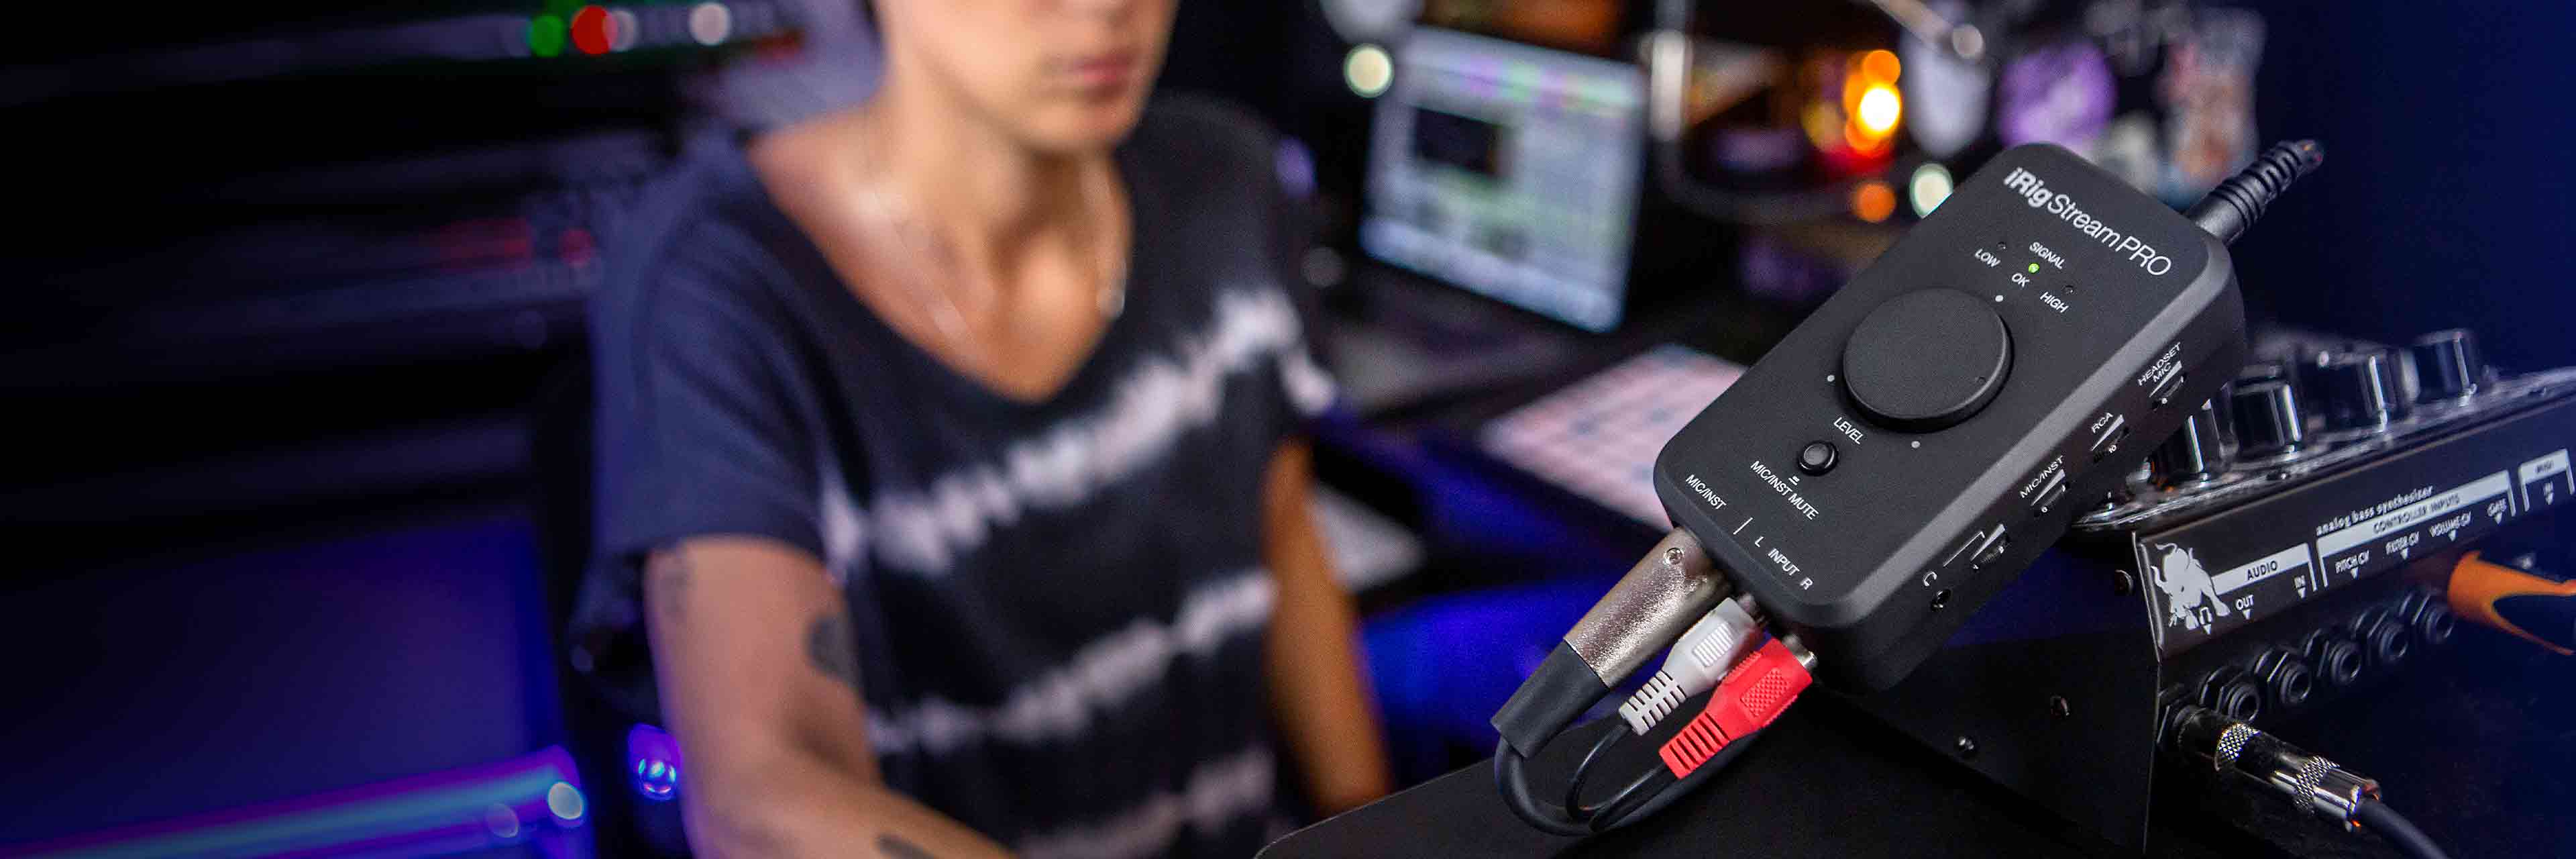 Everything you need for professional quality streaming right in the palm of your hand. IK Multimedia iRig Stream Pro Streaming audio interface with in-line multi-input mixer 